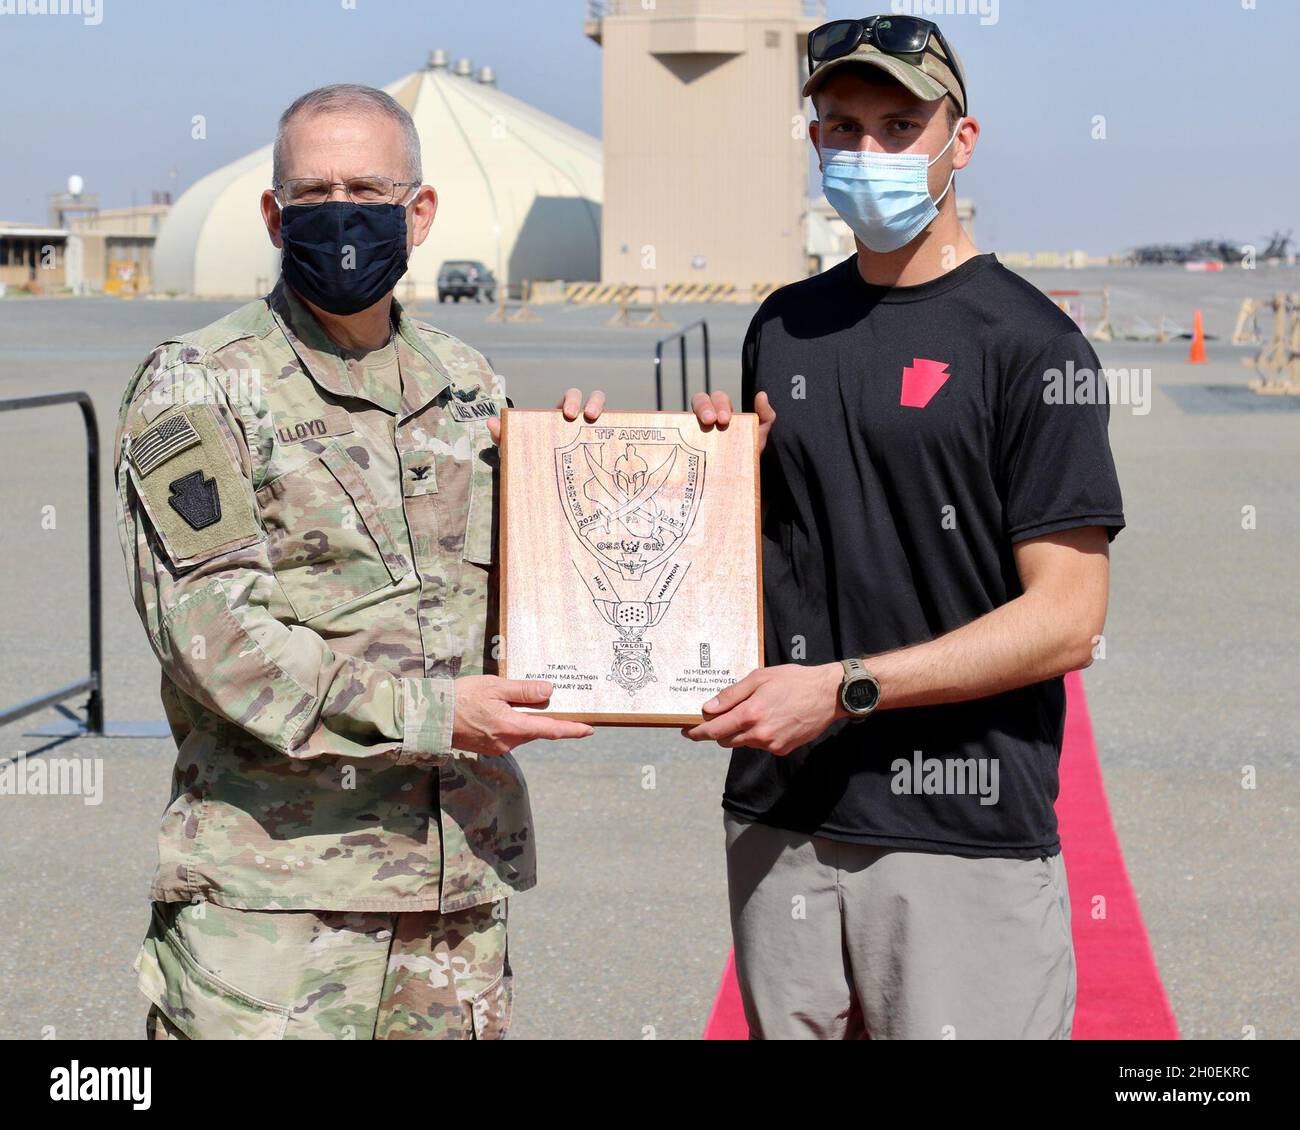 U.S. Army Capt. Matthew Groff, right, a UH-60 pilot with 2-104th General Support Aviation Battalion, 28th Expeditionary Combat Aviation Brigade, receives a handmade plaque from Col. Howard Lloyd, 28th ECAB commander, for being the top finisher in the Task Force Anvil Half-Marathon. About 120 Soldiers raced in memory of Michael J. Novosel, Sr., a native of Etna, Pennsylvania, who served for over 40 years as an Army aviator and received the Medal of Honor for rescuing 29 Soldiers during the Vietnam War. Stock Photo